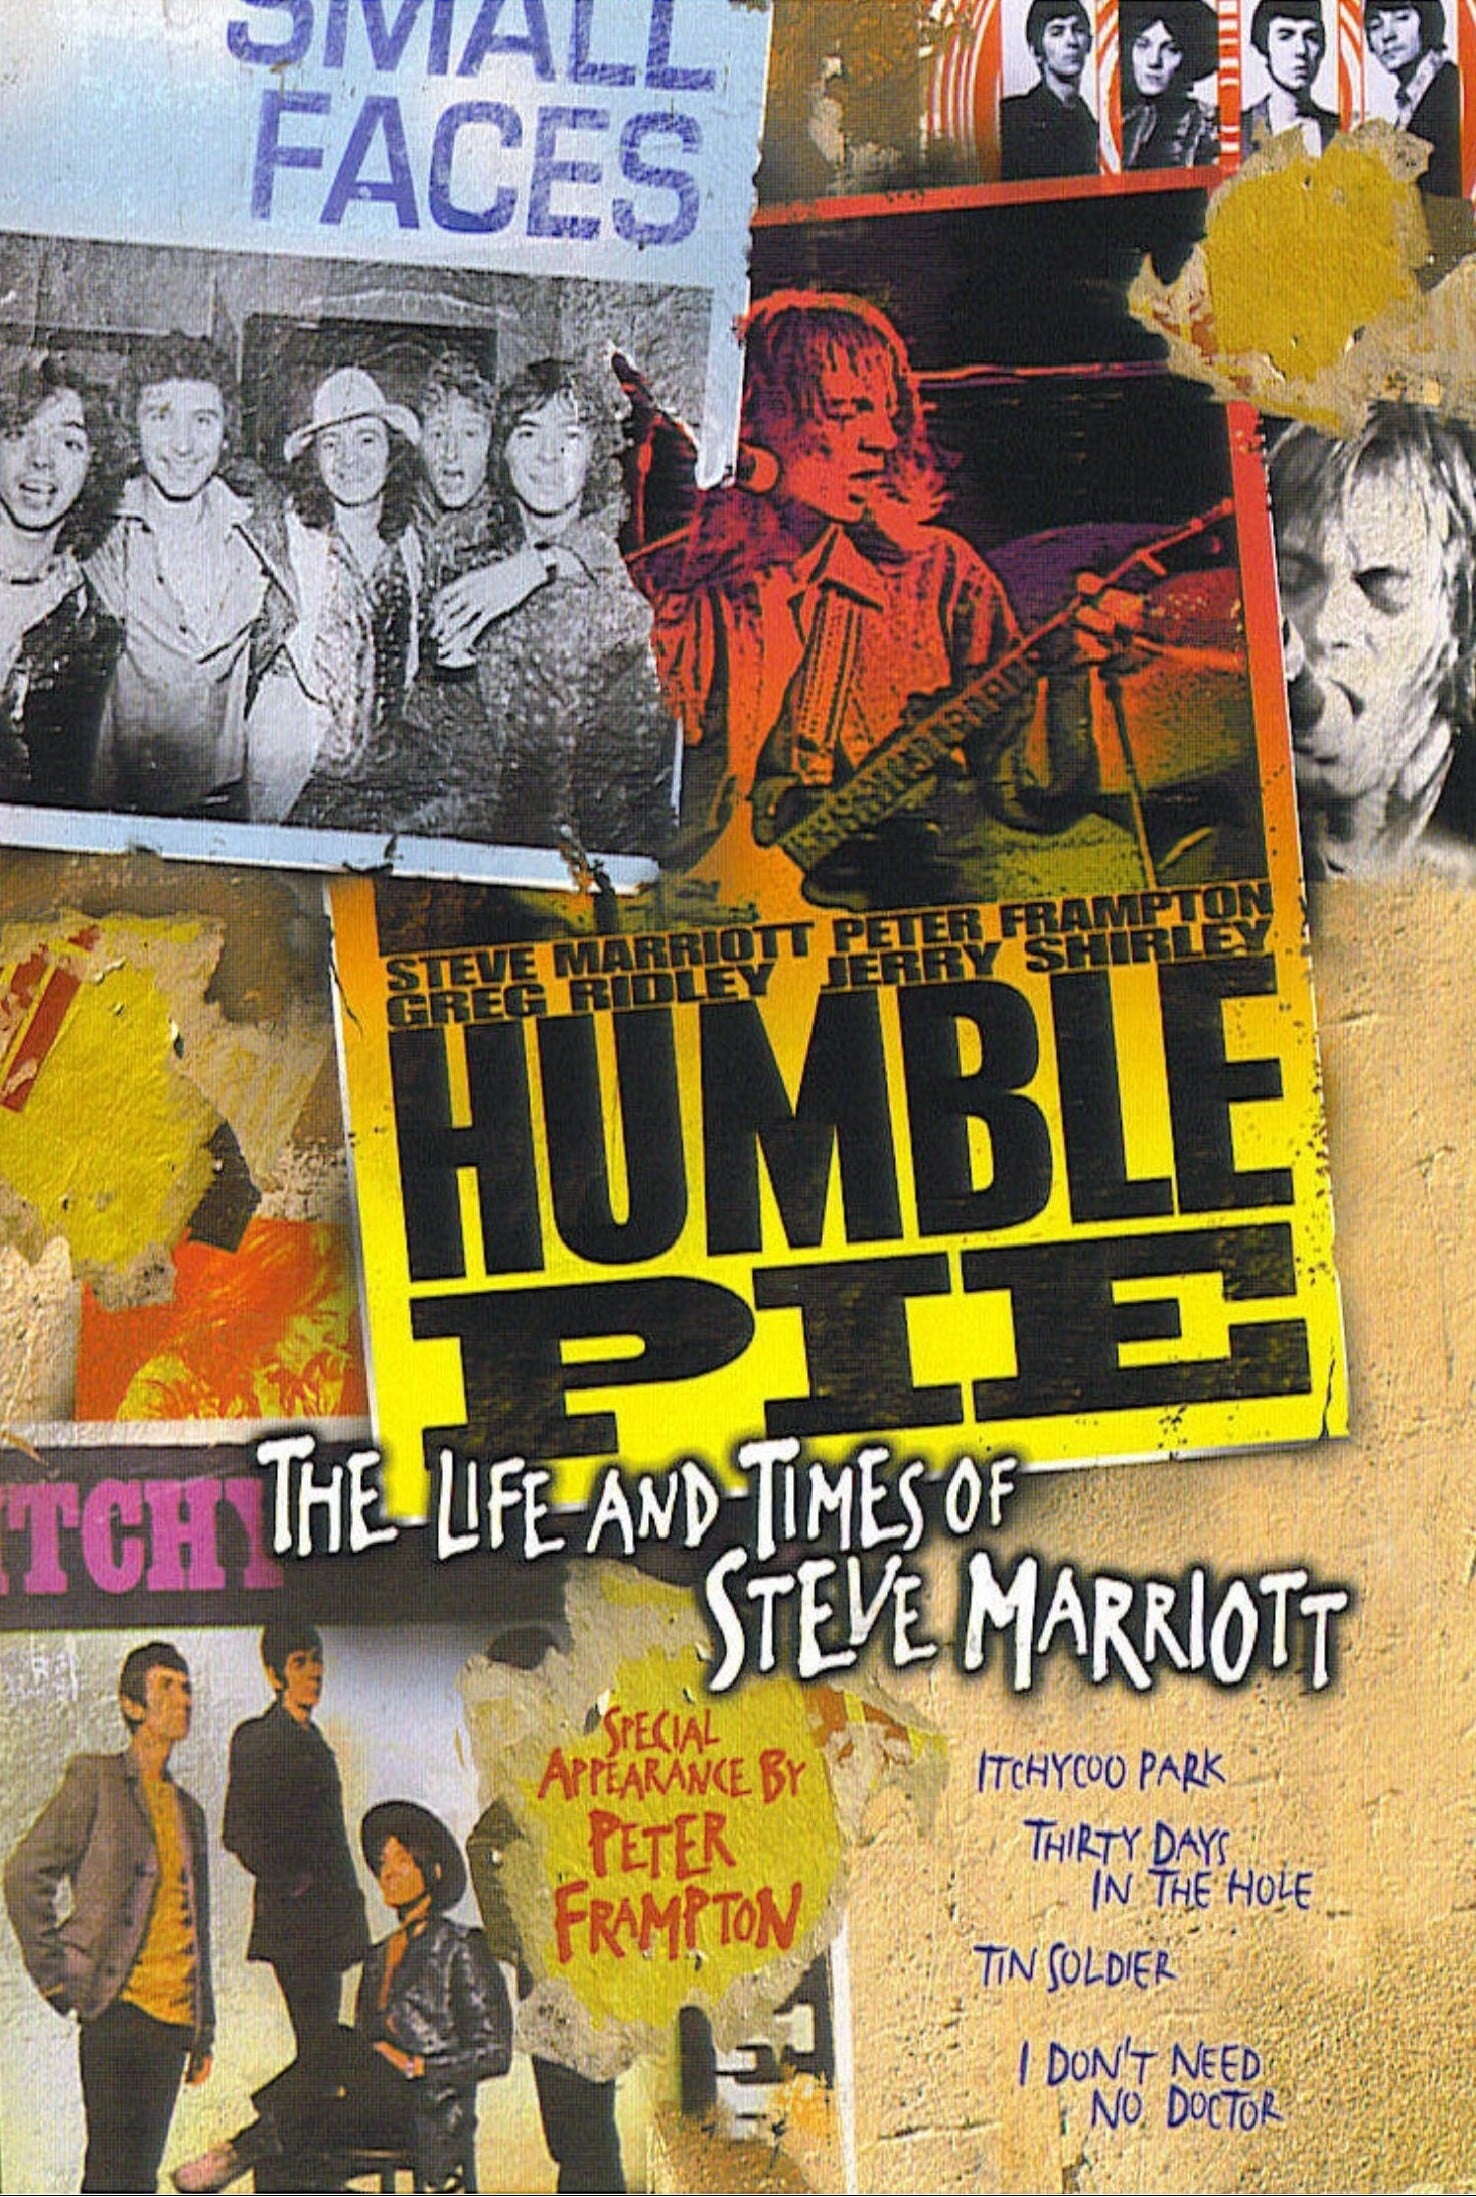 The Life and Times of Steve Marriott